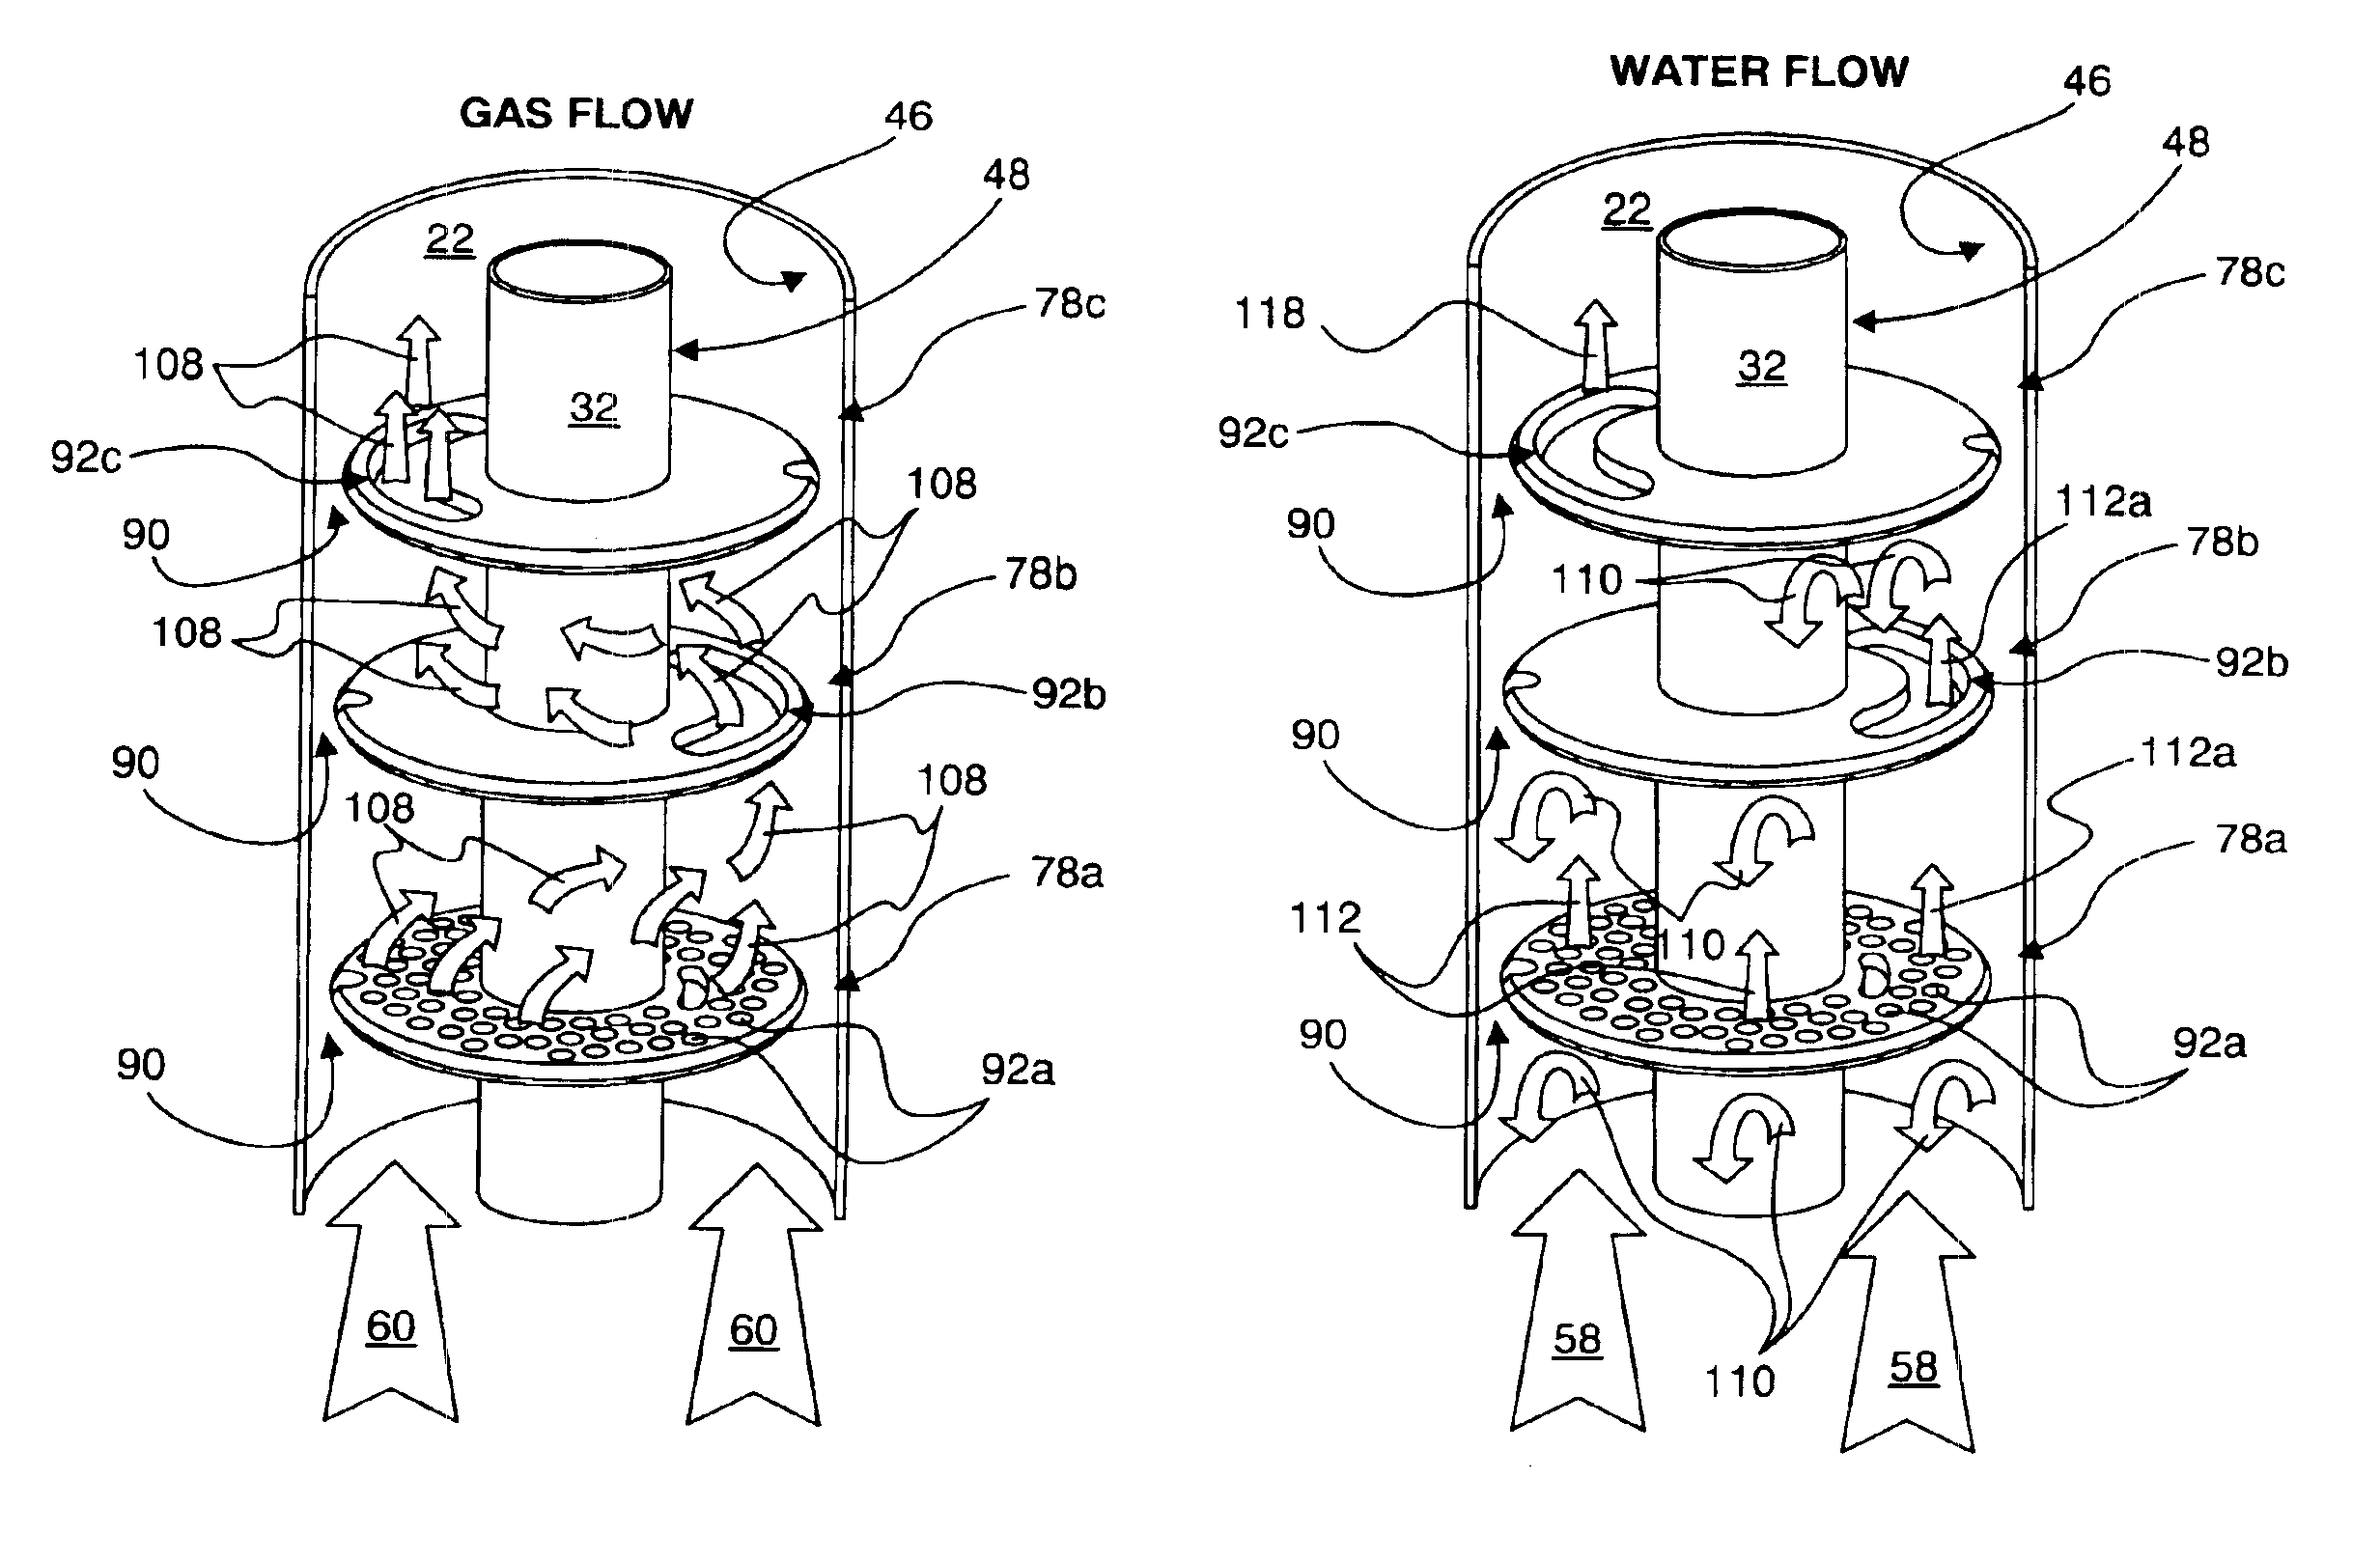 Baffle system for two-phase annular flow